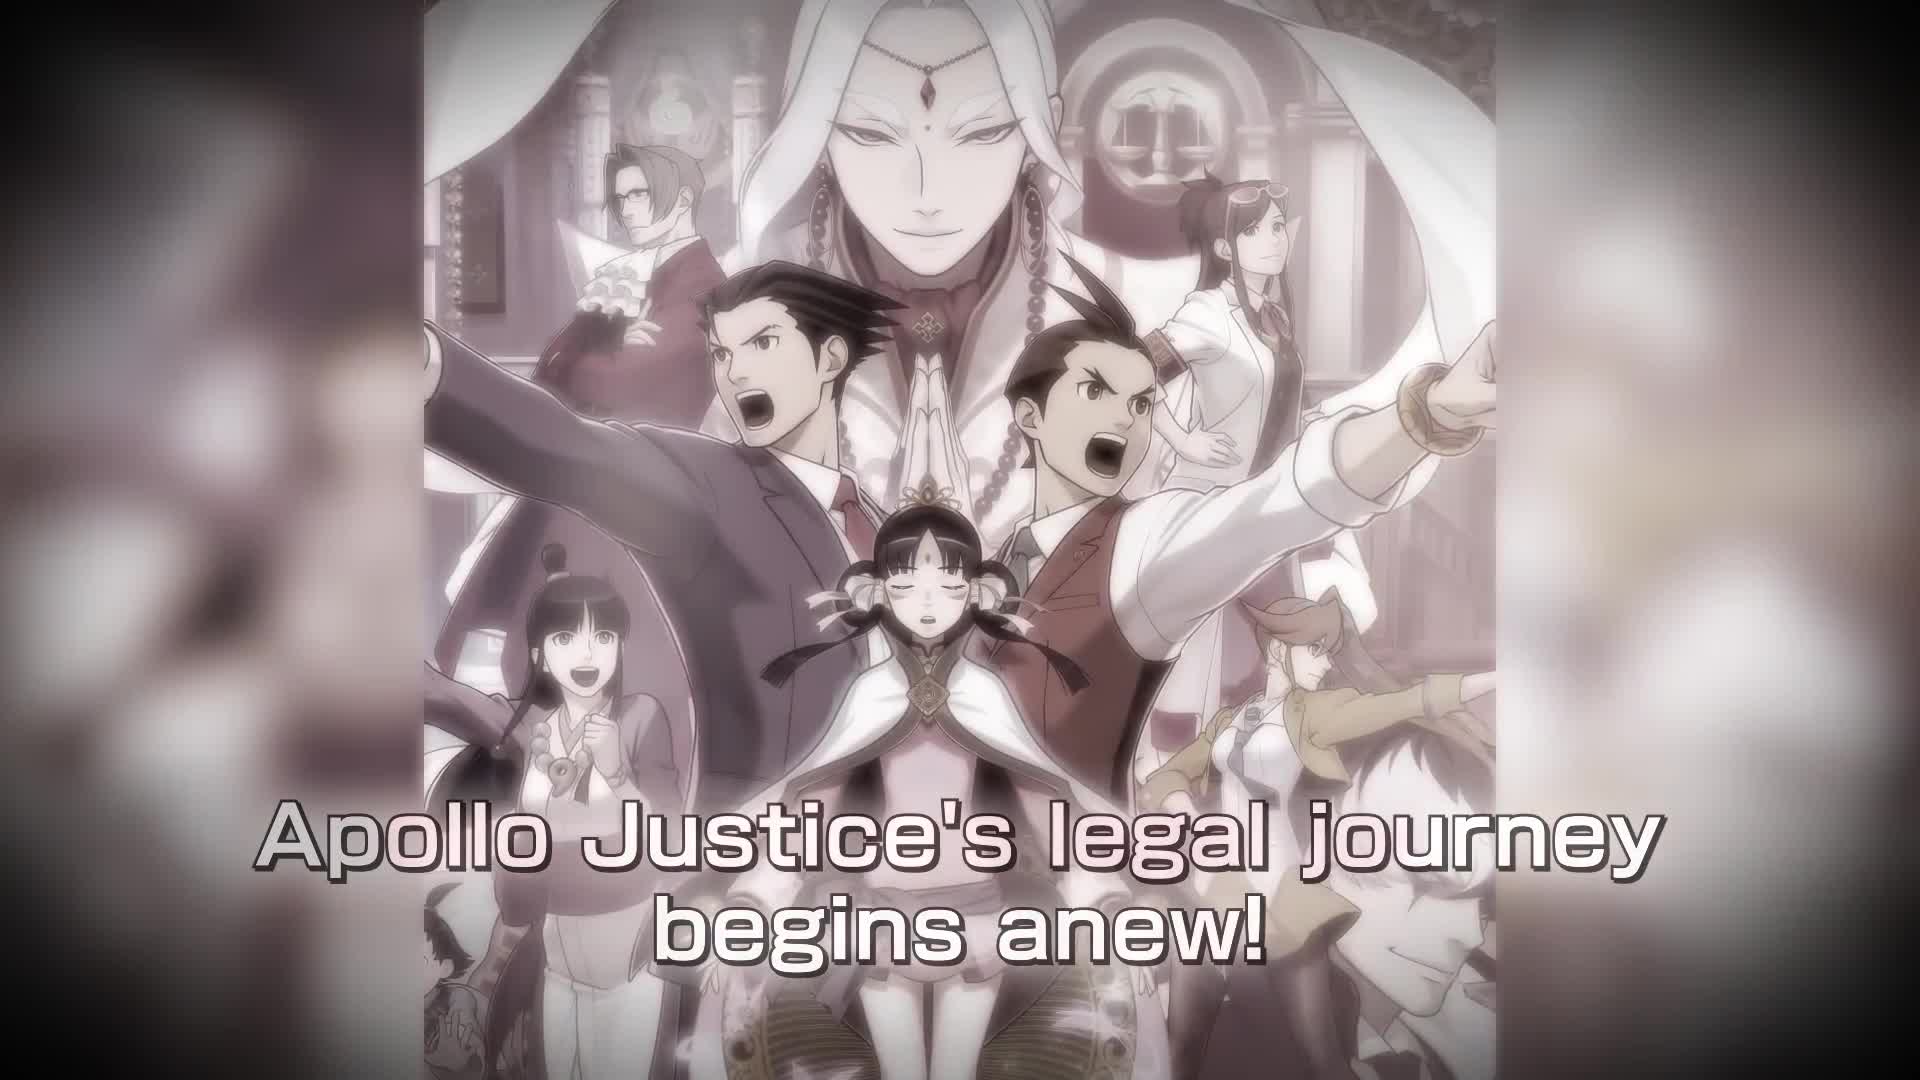 Apollo Justice: Ace Attorney (Nintendo DS) - Review » CelJaded